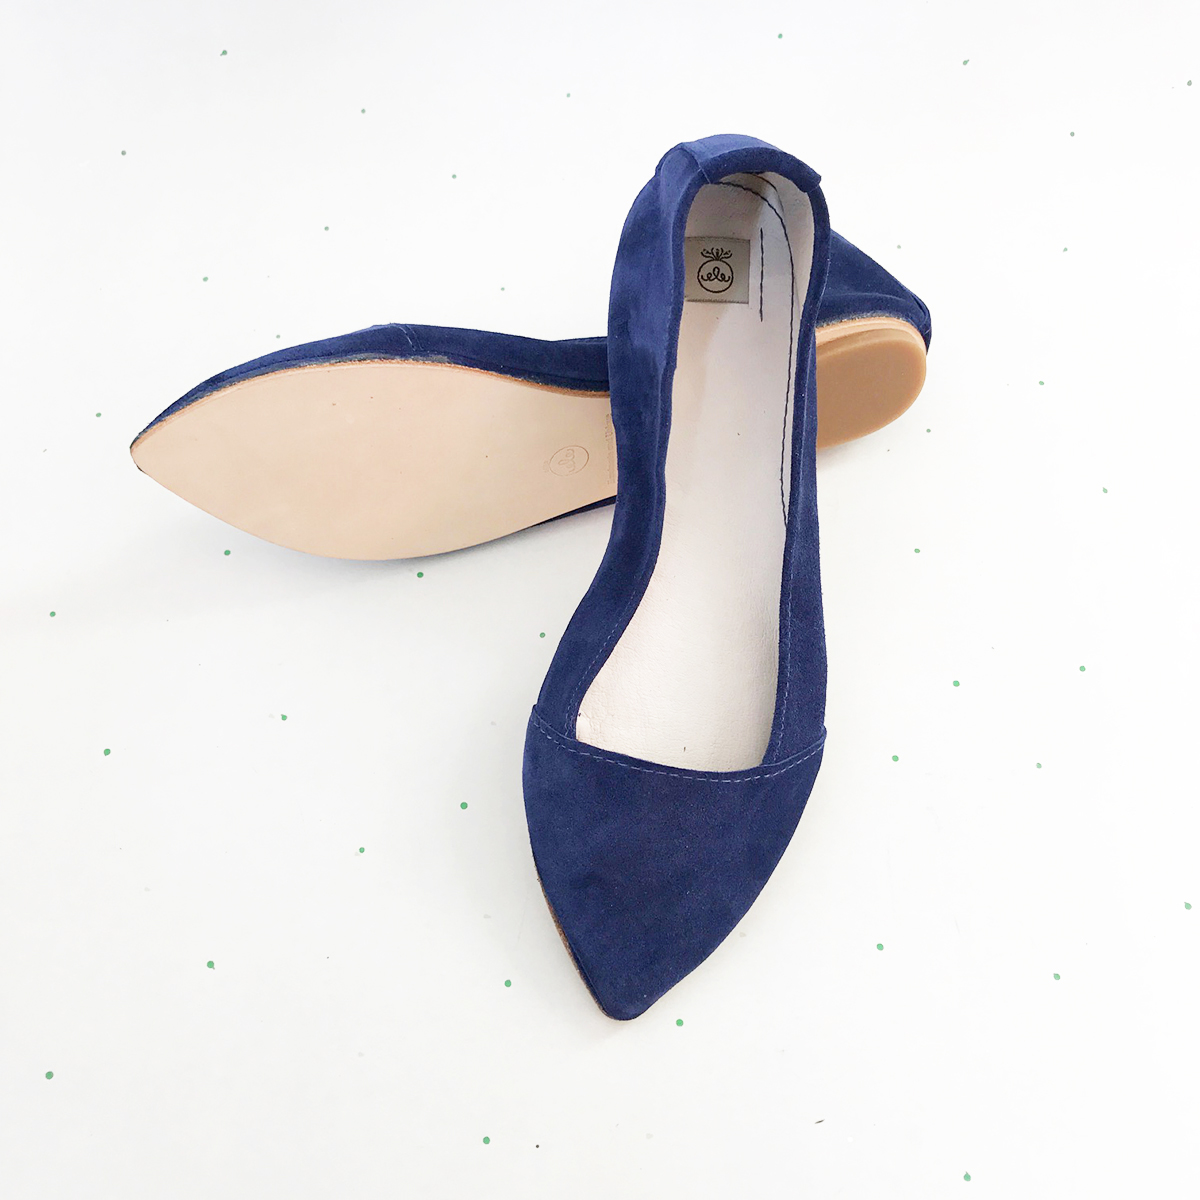 D'ORSAY POINTY FLATS in NAVY BLUE LEATHER — Ele Handmade Shoes